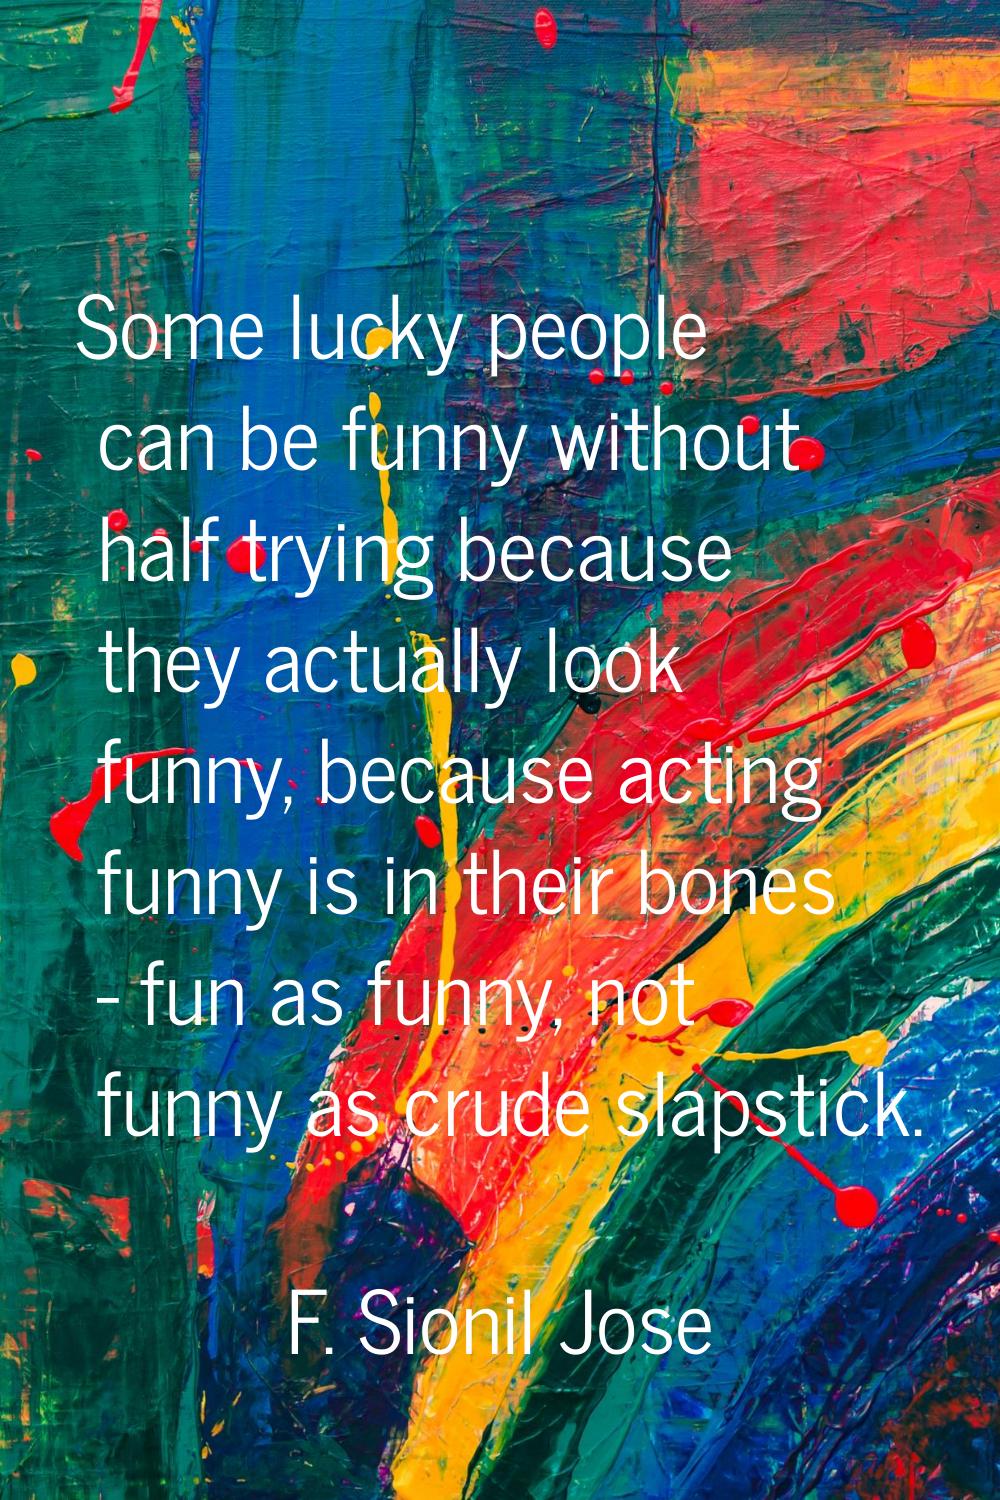 Some lucky people can be funny without half trying because they actually look funny, because acting